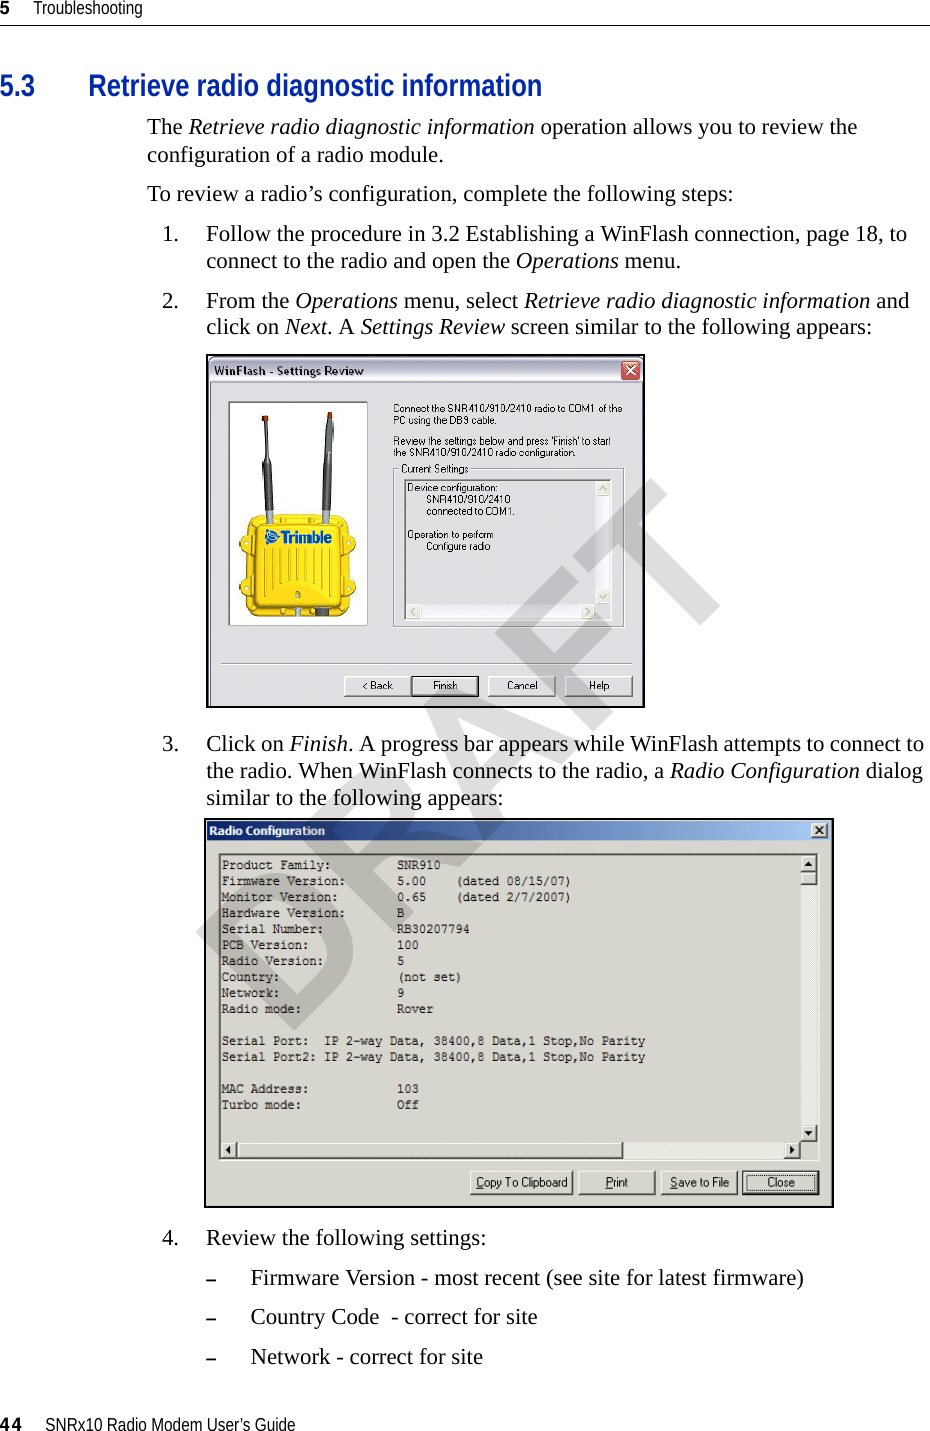 5     Troubleshooting44     SNRx10 Radio Modem User’s Guide5.3 Retrieve radio diagnostic informationThe Retrieve radio diagnostic information operation allows you to review the configuration of a radio module.To review a radio’s configuration, complete the following steps:1. Follow the procedure in 3.2 Establishing a WinFlash connection, page 18, to connect to the radio and open the Operations menu.2. From the Operations menu, select Retrieve radio diagnostic information and click on Next. A Settings Review screen similar to the following appears:3. Click on Finish. A progress bar appears while WinFlash attempts to connect to the radio. When WinFlash connects to the radio, a Radio Configuration dialog similar to the following appears:4. Review the following settings:–Firmware Version - most recent (see site for latest firmware)–Country Code  - correct for site–Network - correct for siteDRAFT